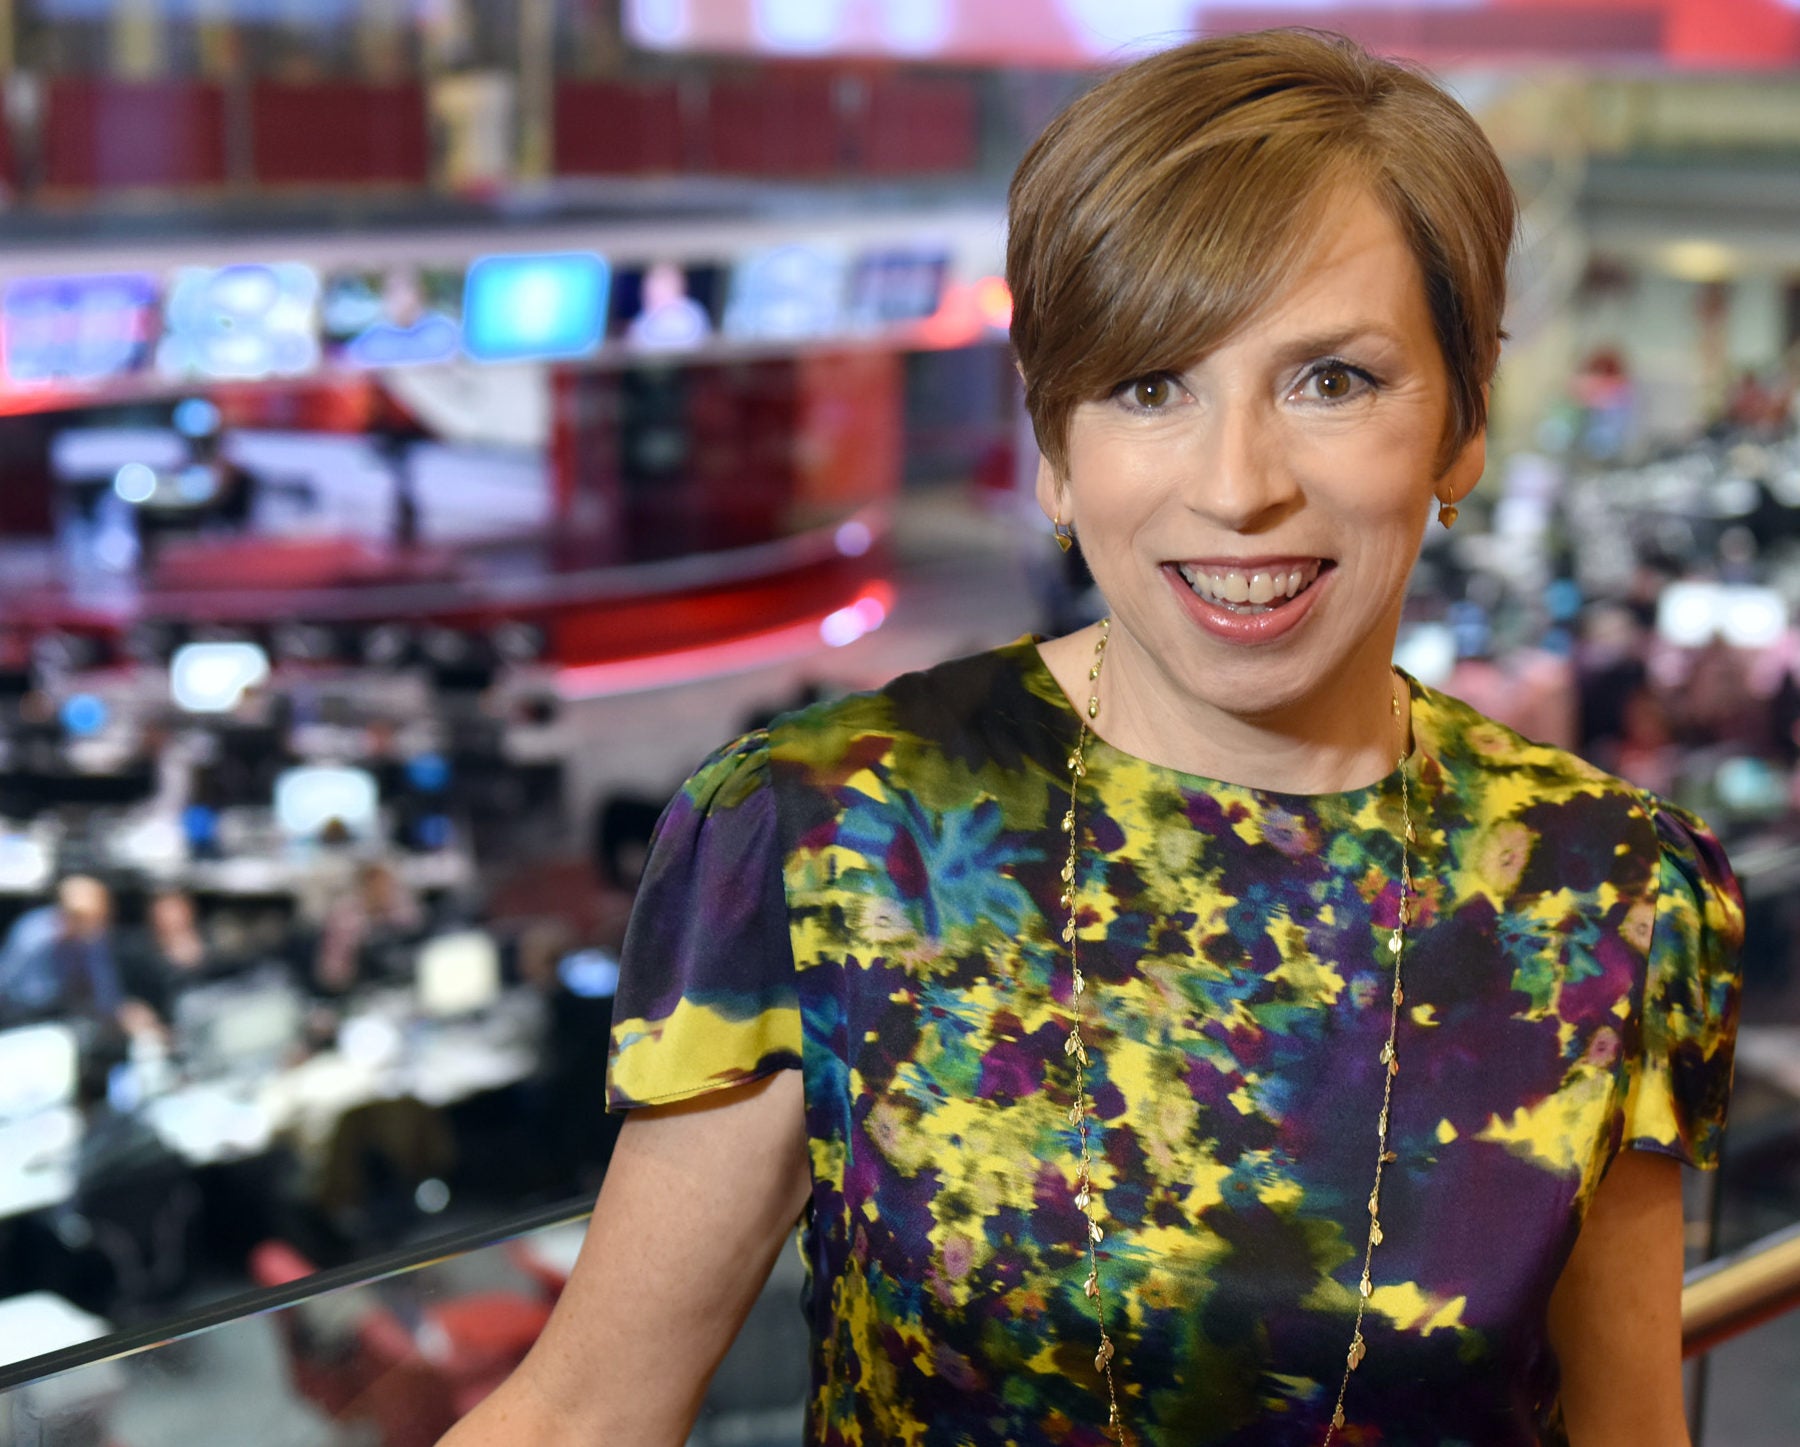 BBC head of news Fran Unsworth joins corporation's board